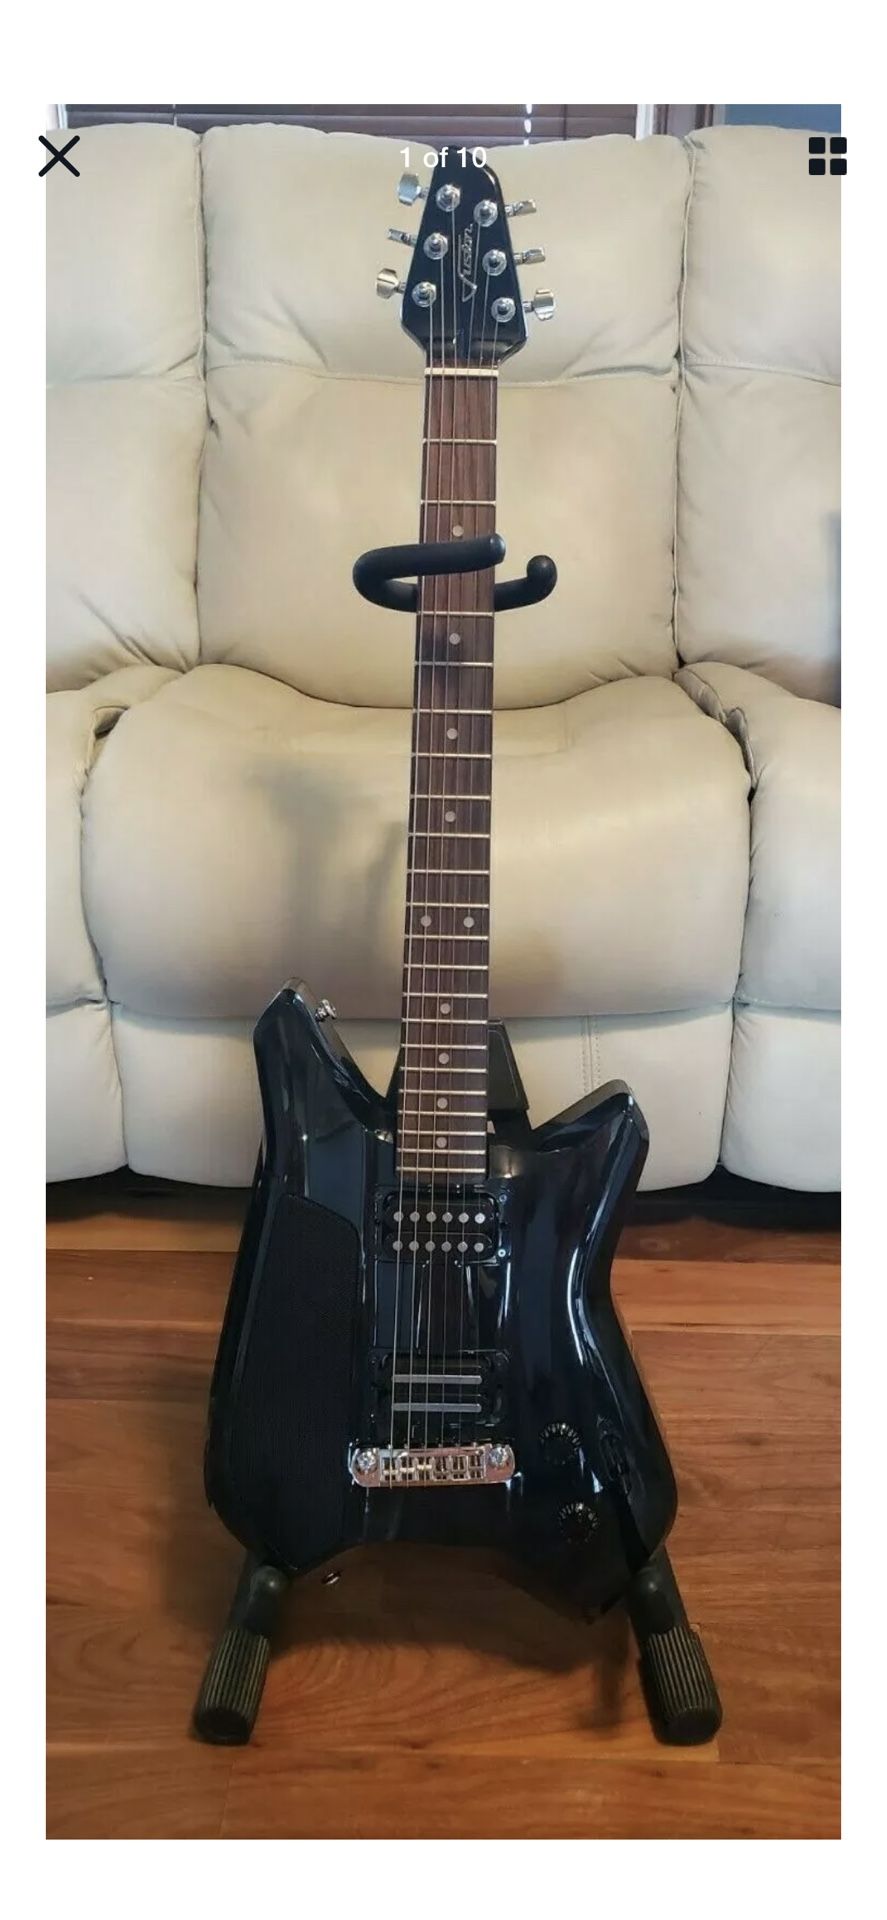 Fusion Guitar, totally portable and very unique !!